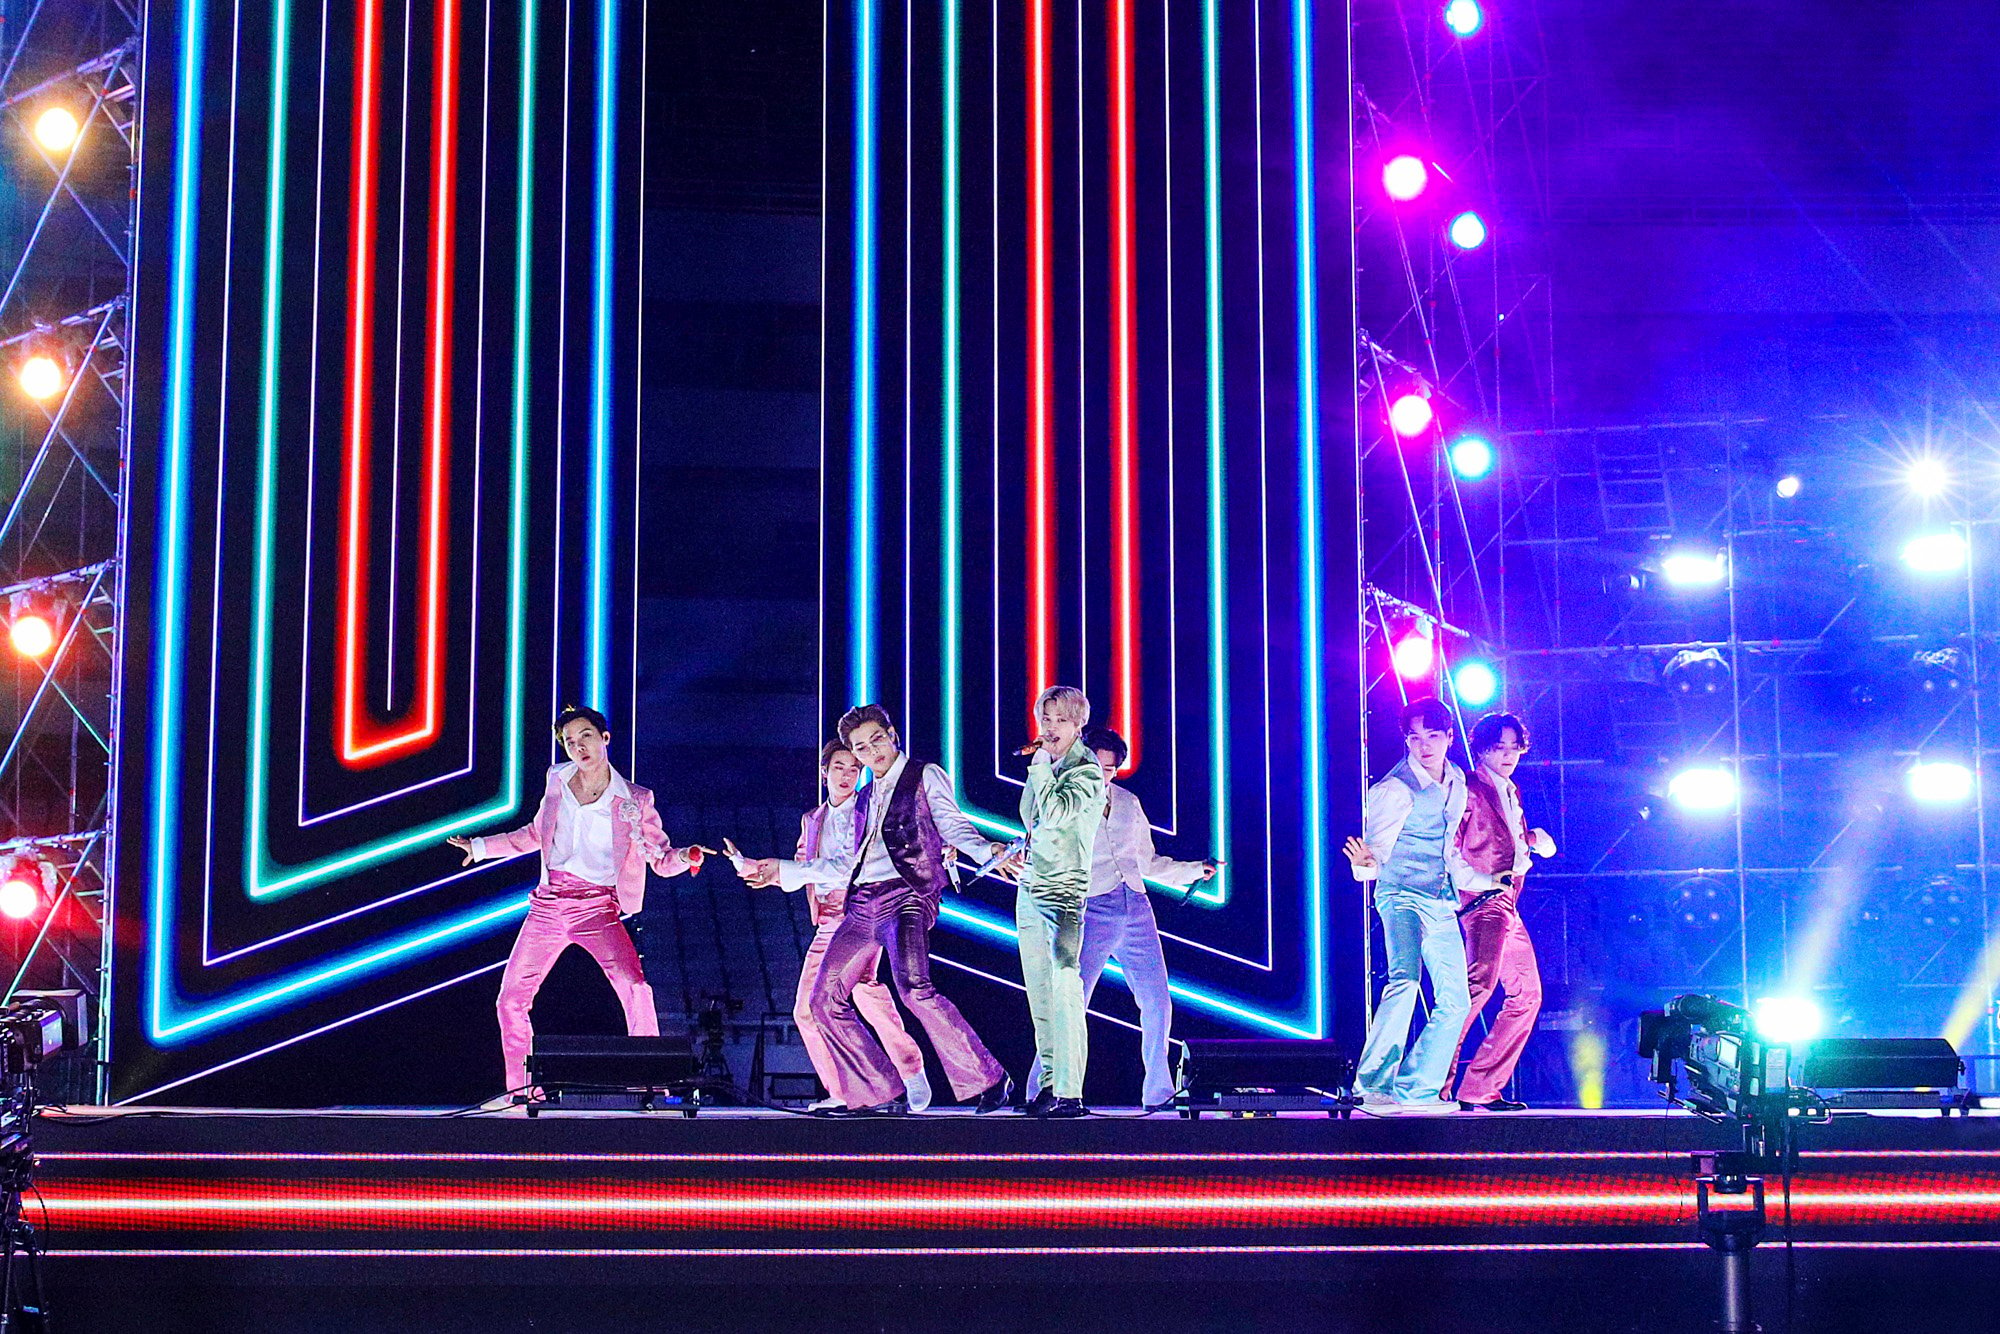 J-Hope, Jin, RM, Jimin, V, Suga, and Jungkook of BTS perform on stage for the 2020 American Music Awards